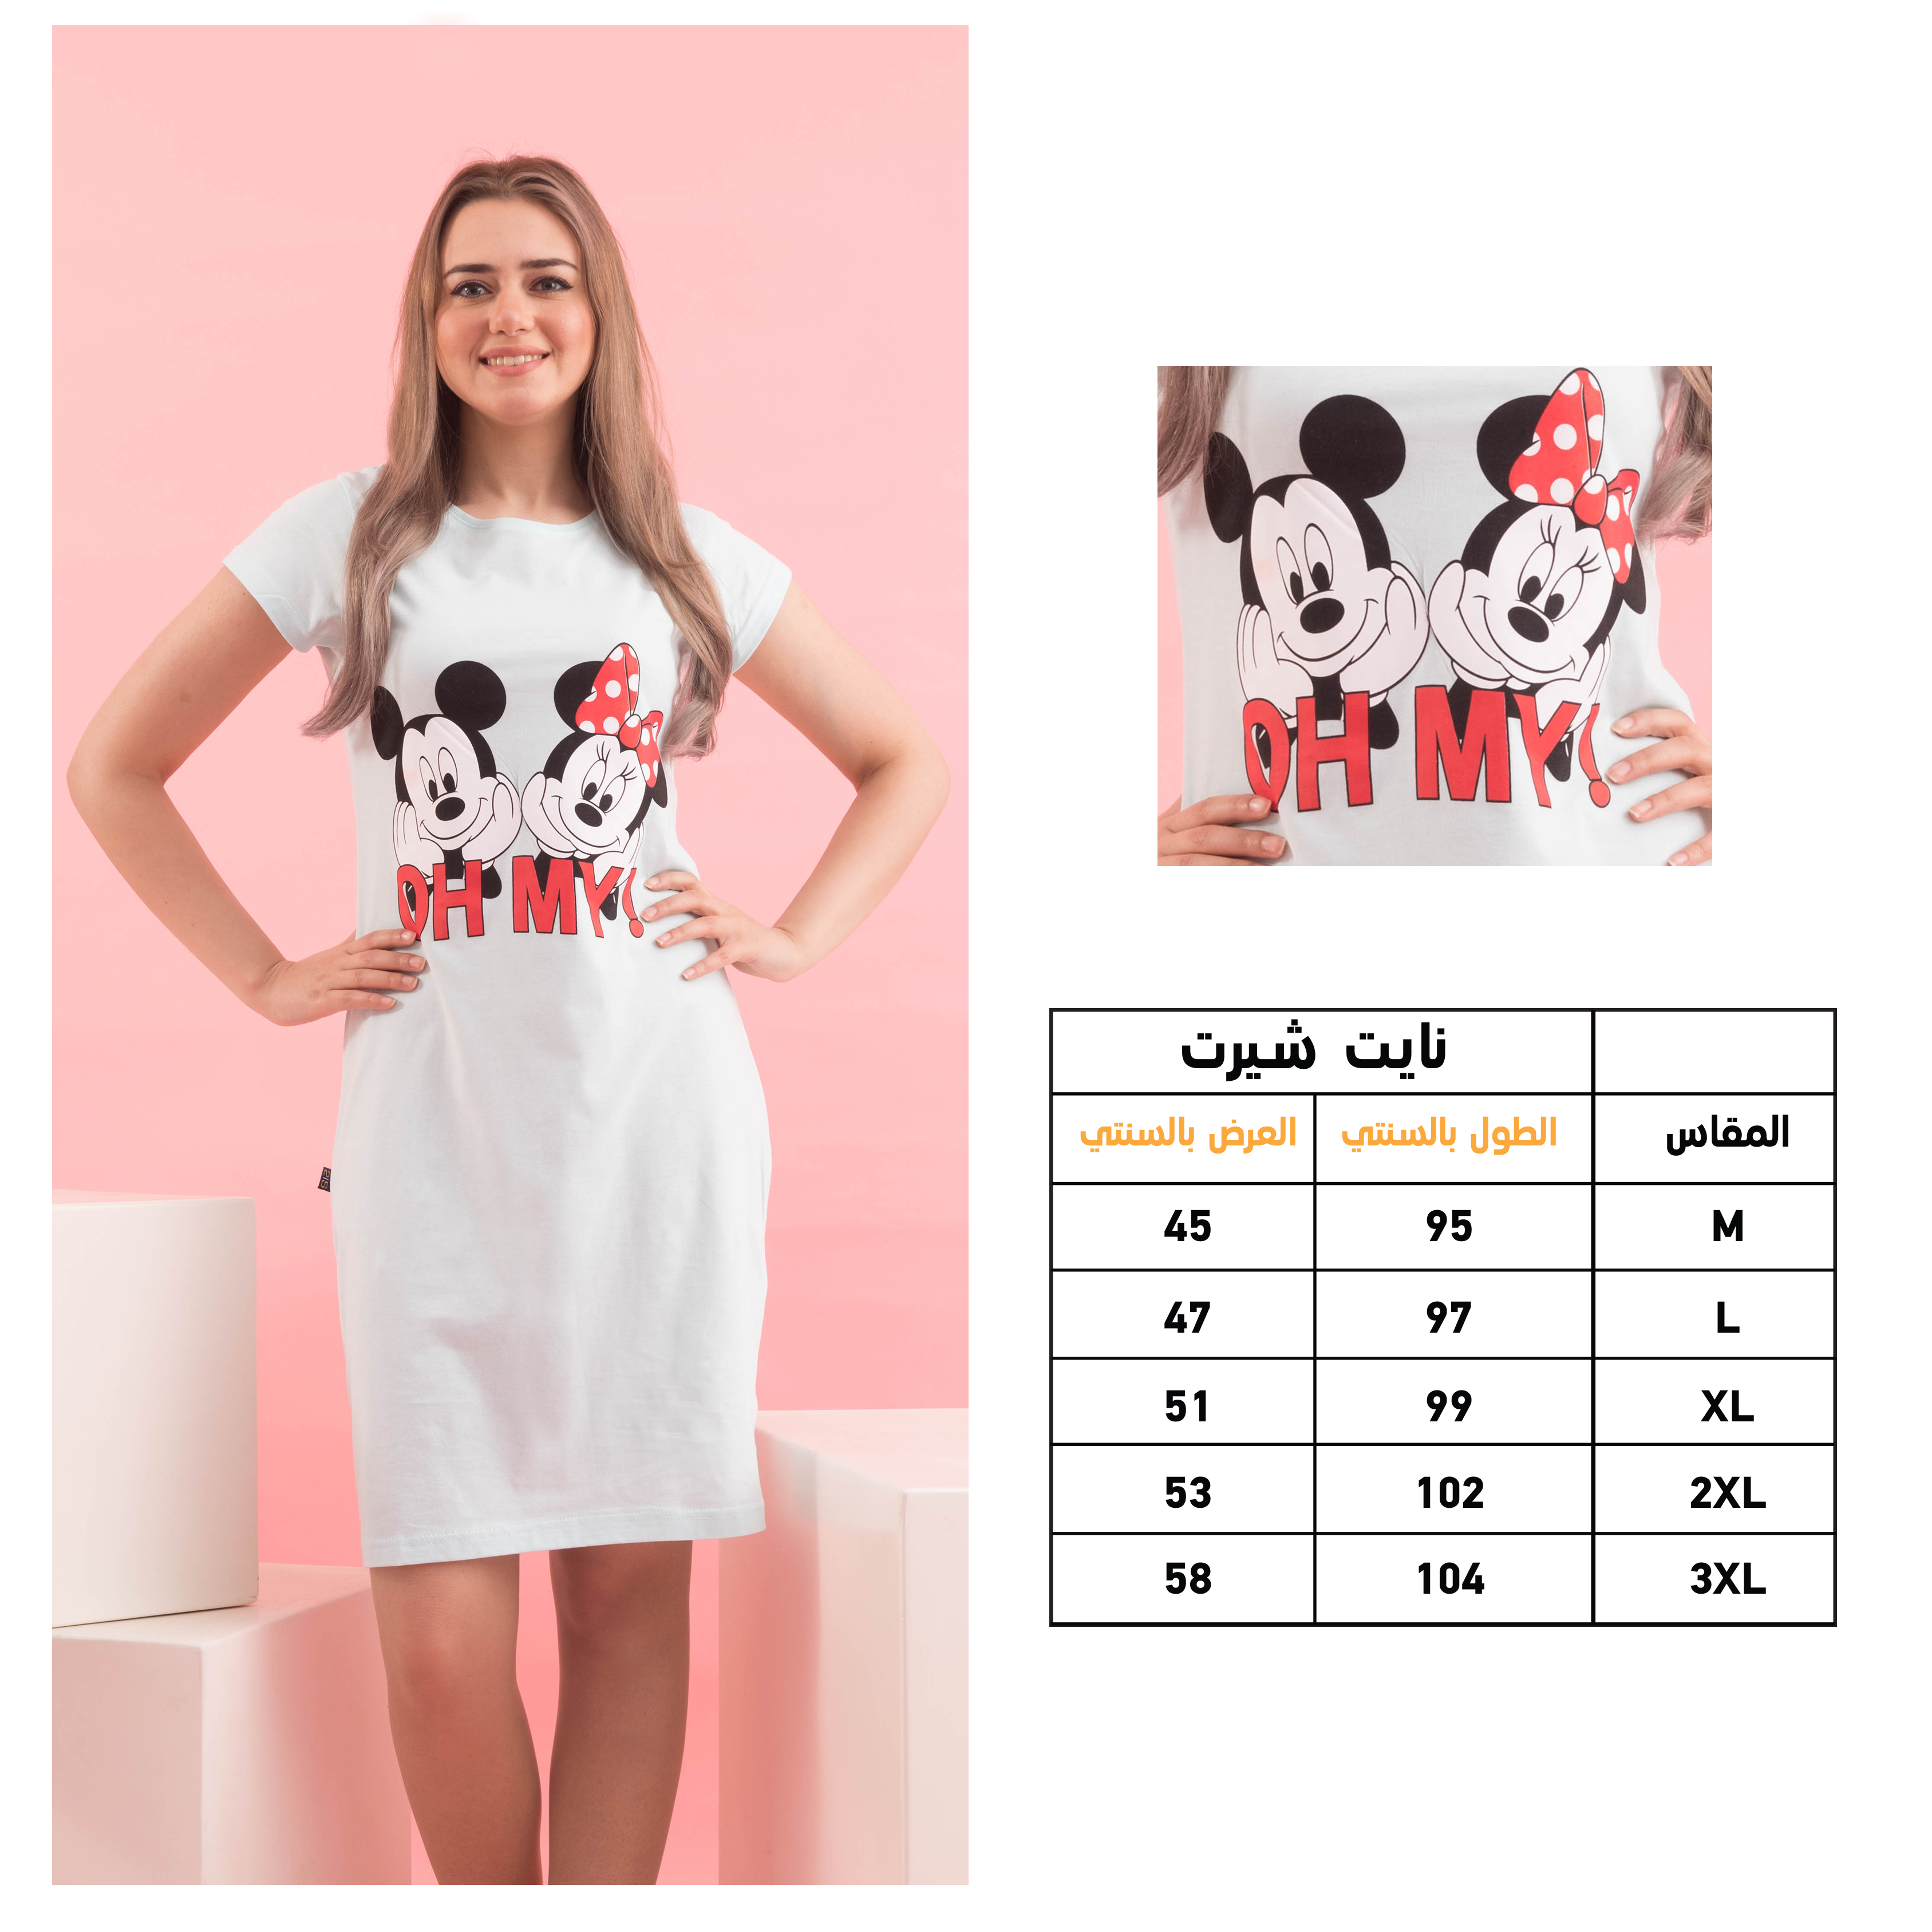 Oh my! Mickey and Minnie women's cash